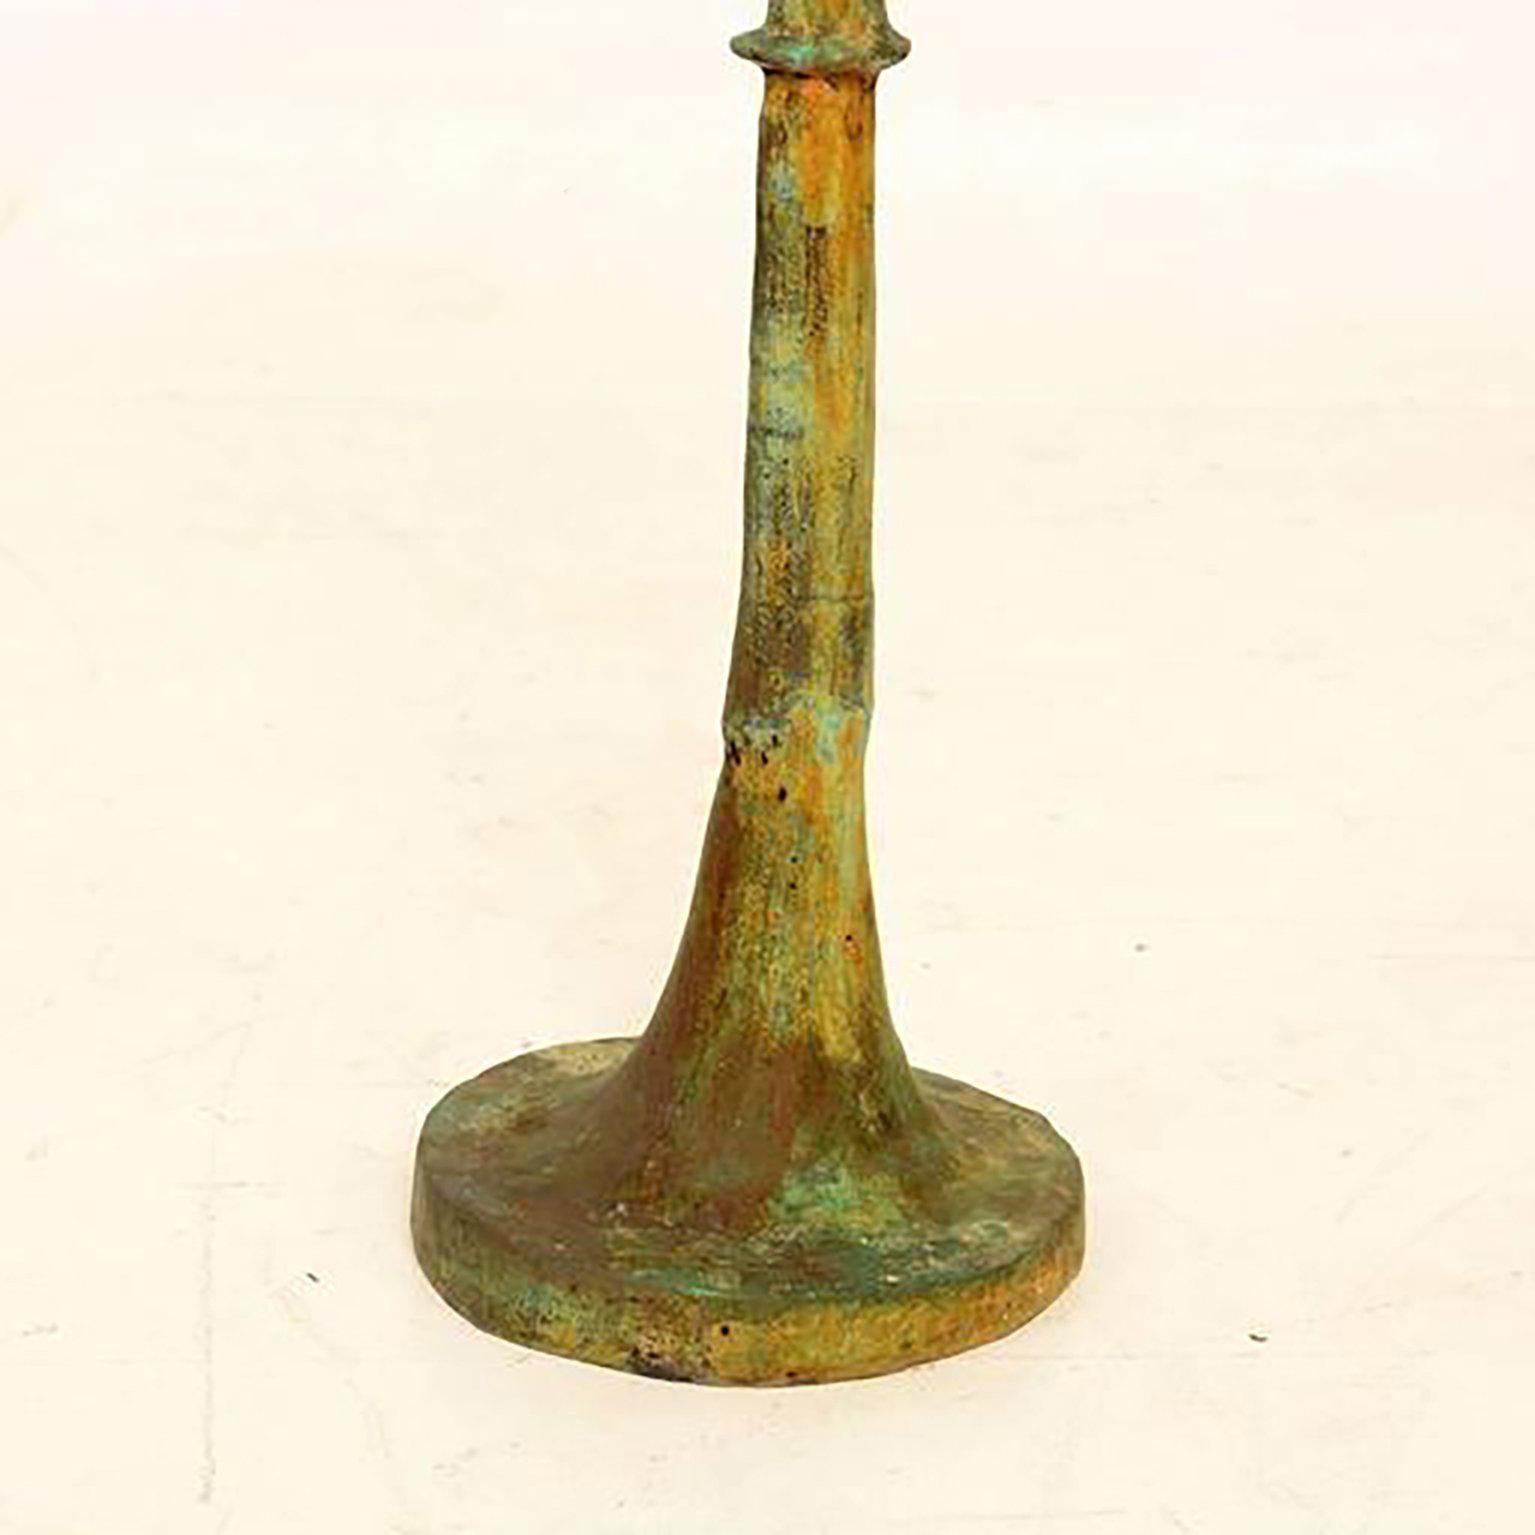 Patinated Elegant Pair of Tete de Femme Table Lamps after Giacometti 1950s